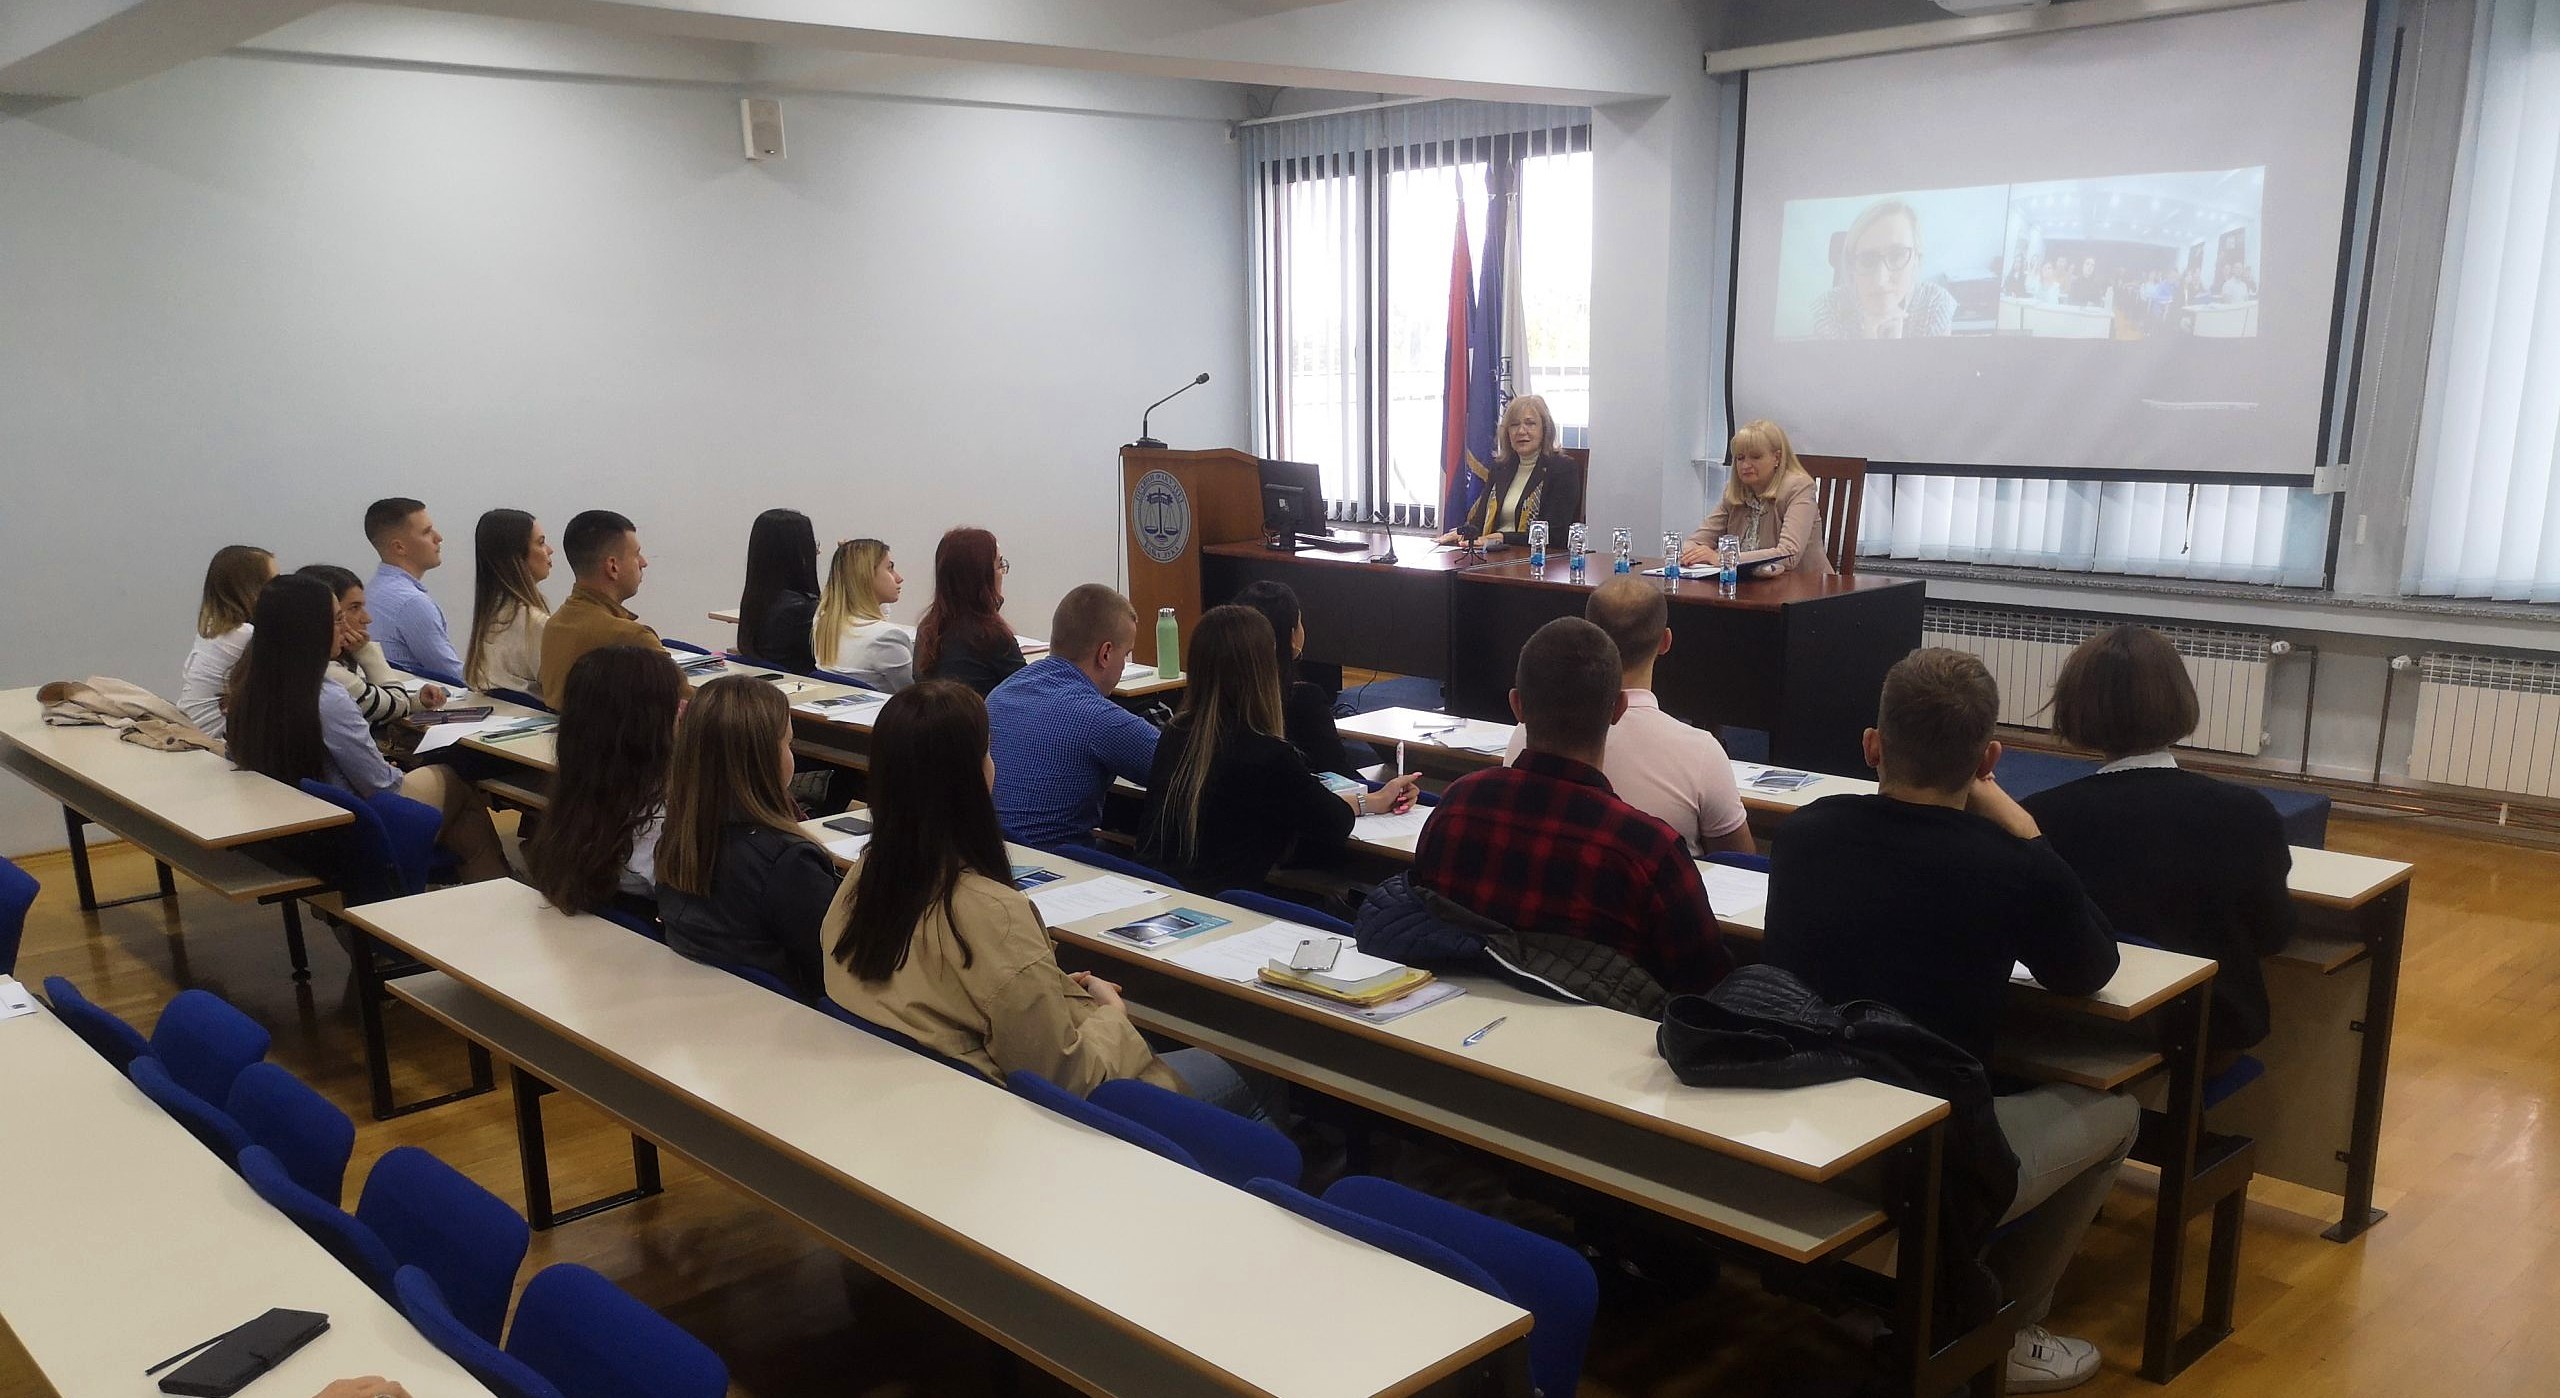 Opening of Human Rights Legal Clinic in Banja Luka and Zenica